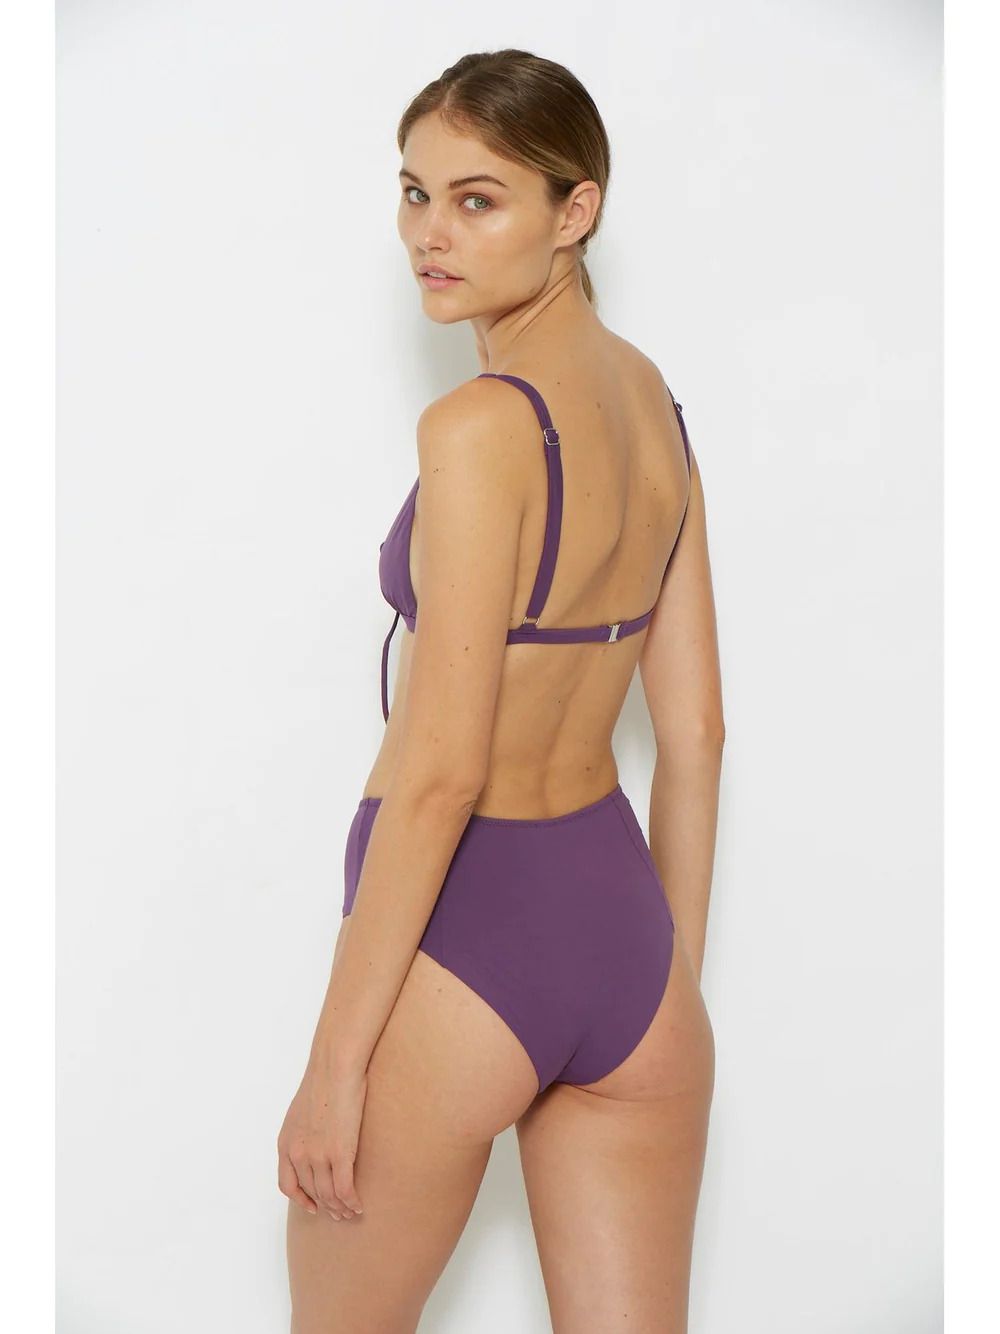 Top 3 Places to Buy Bathing Suits This Summer